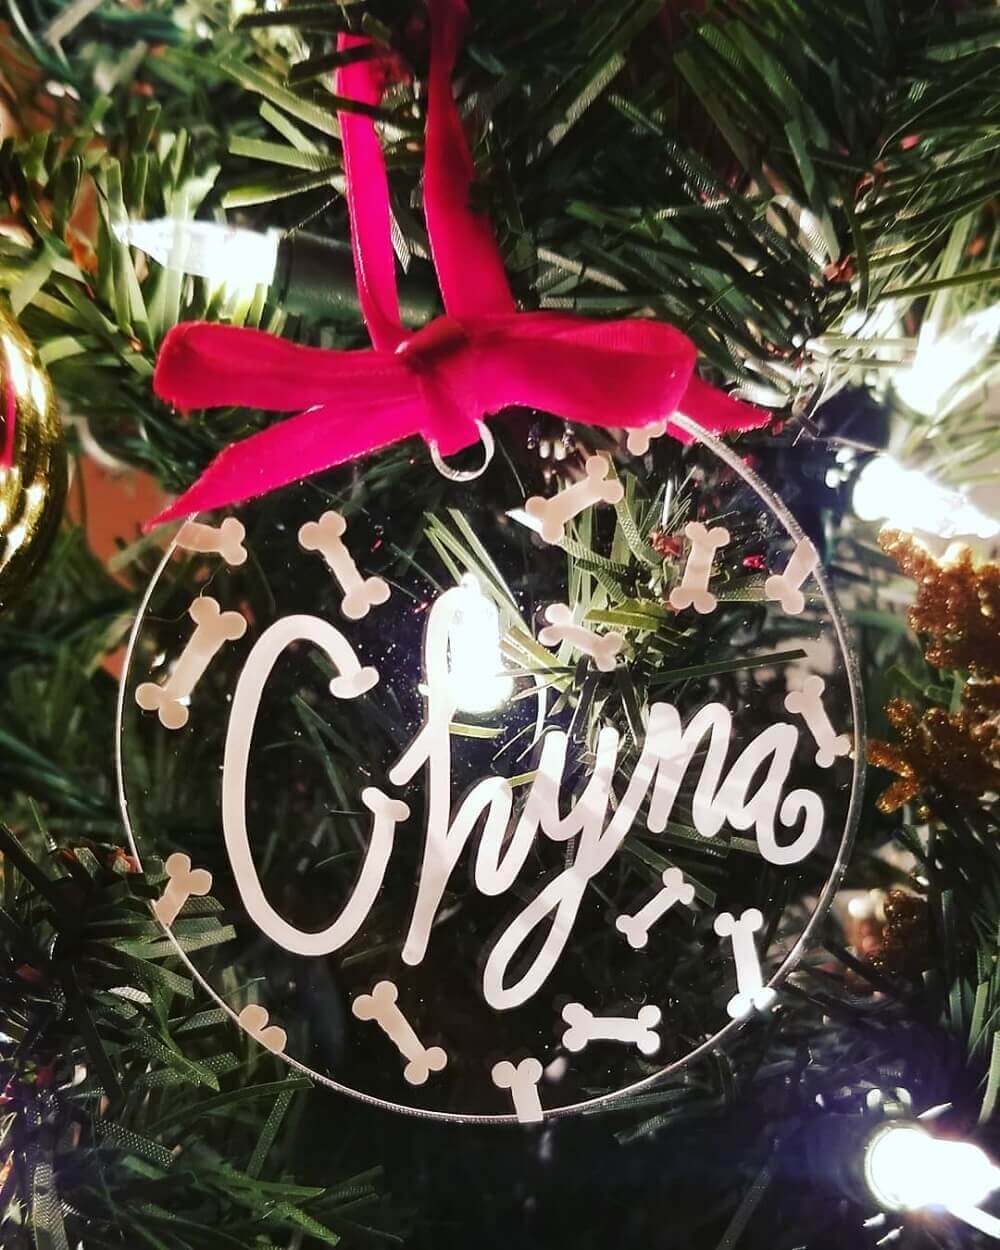 Clear bauble with pet name hanging on a Christmas tree.